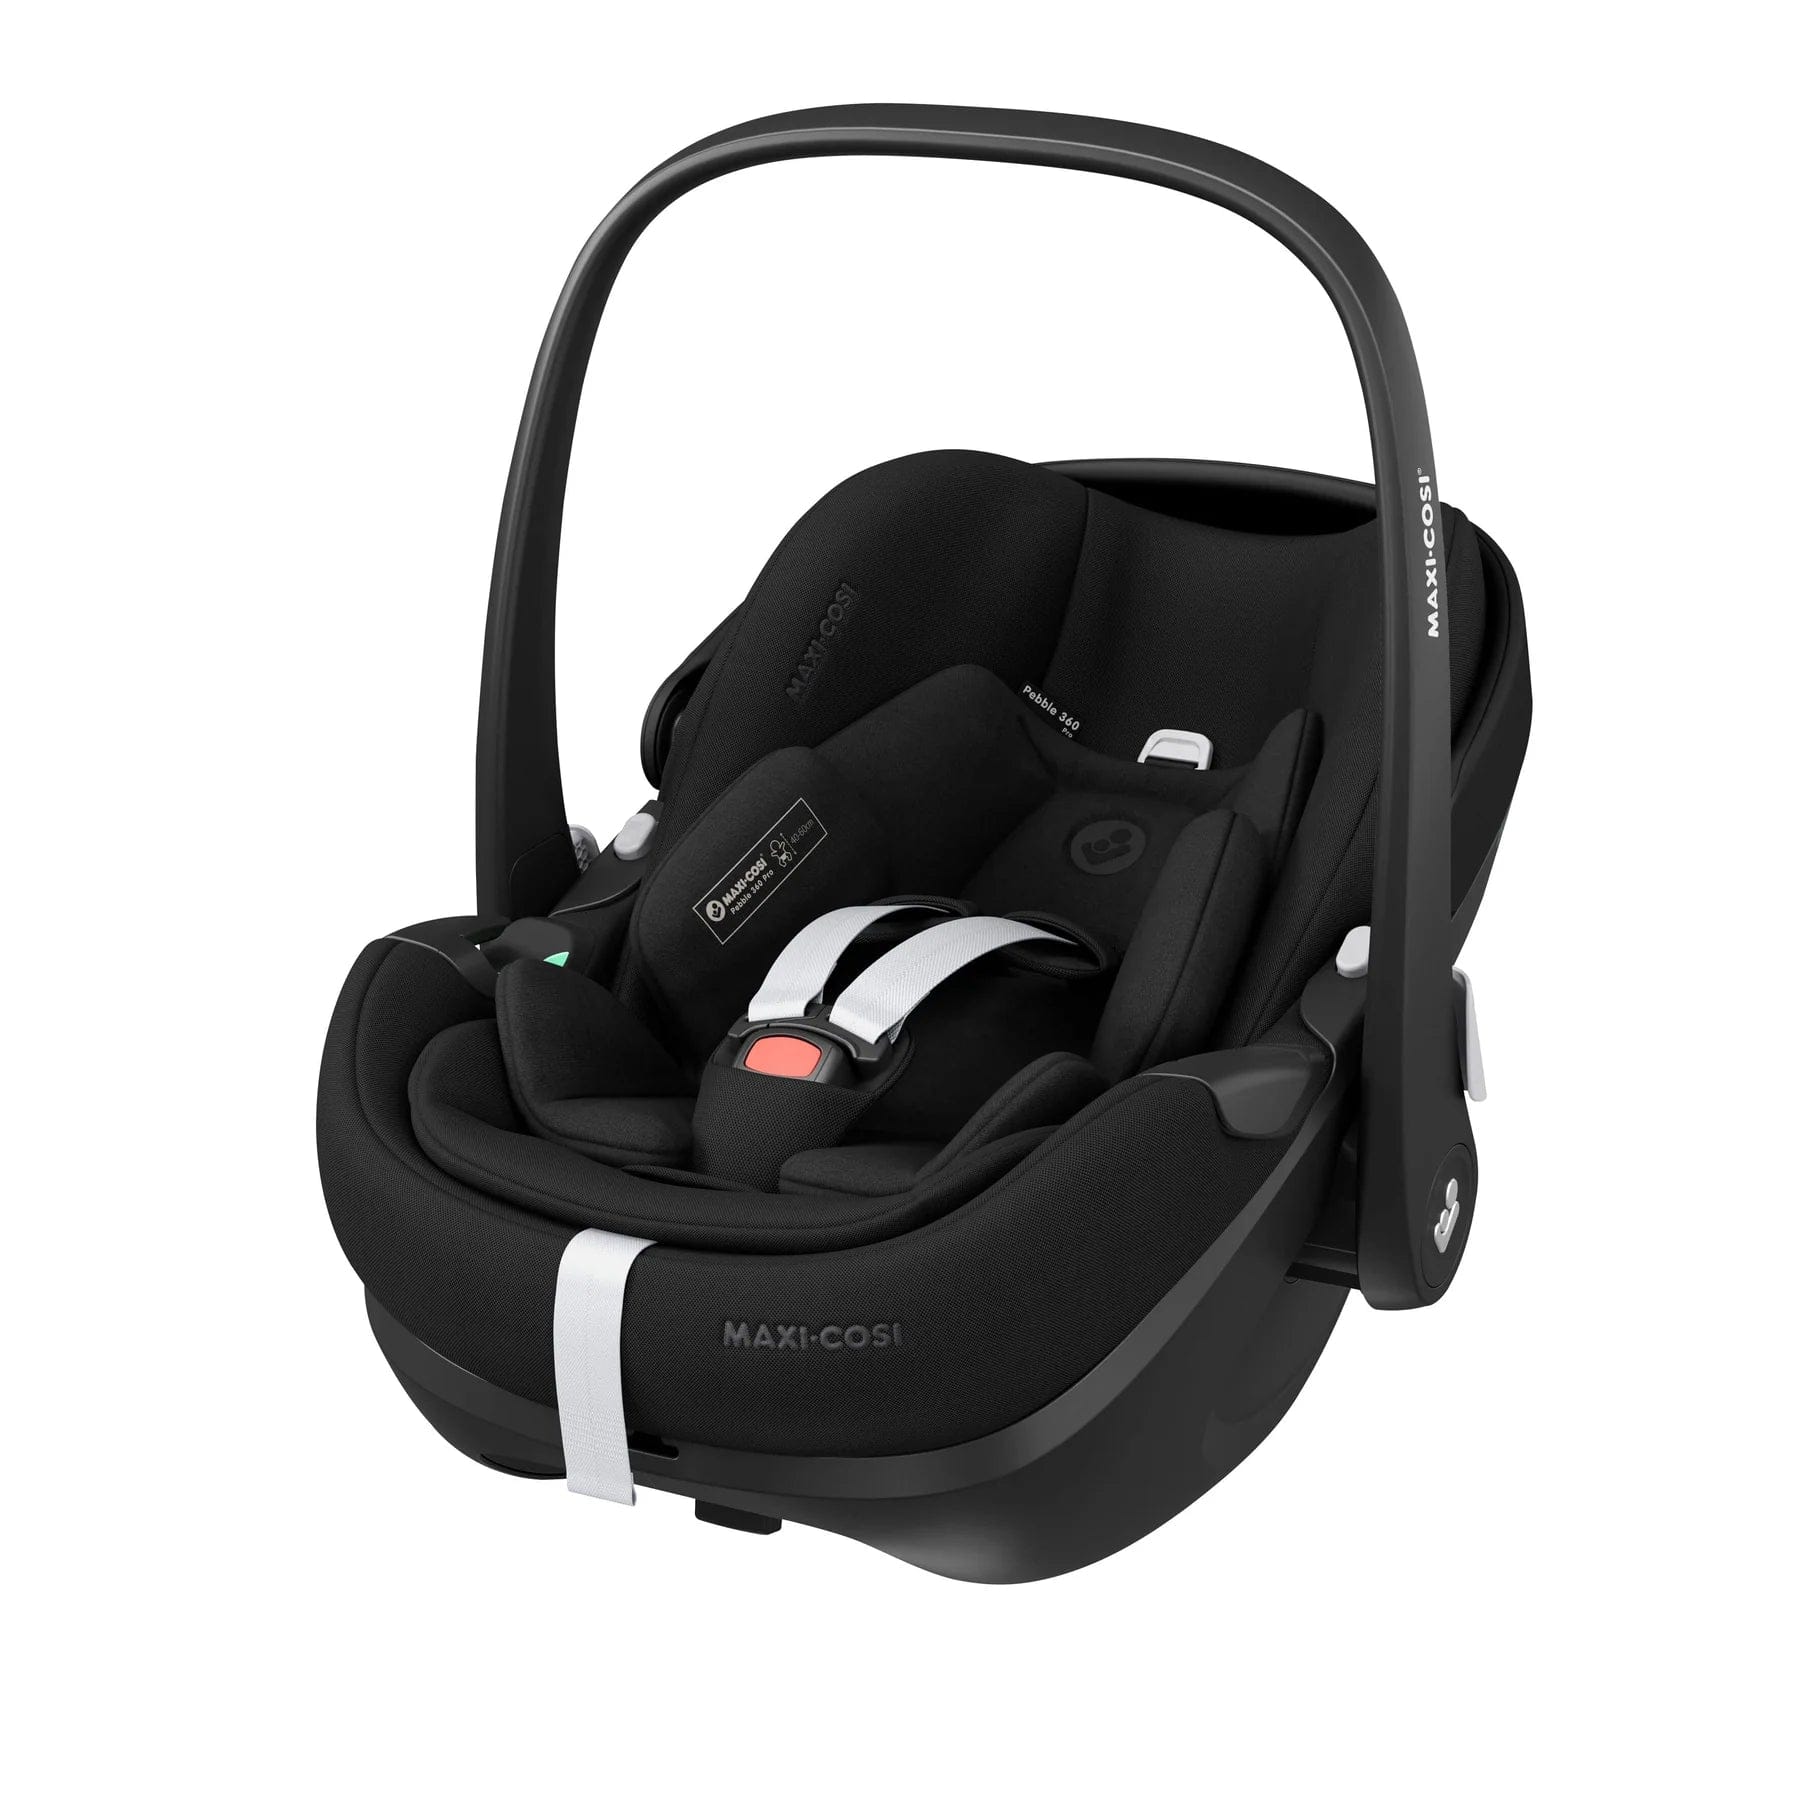 UPPAbaby Vista V2 Pebble 360 PRO & Base Travel System Bundle Lucy Travel Systems 14128-LUC